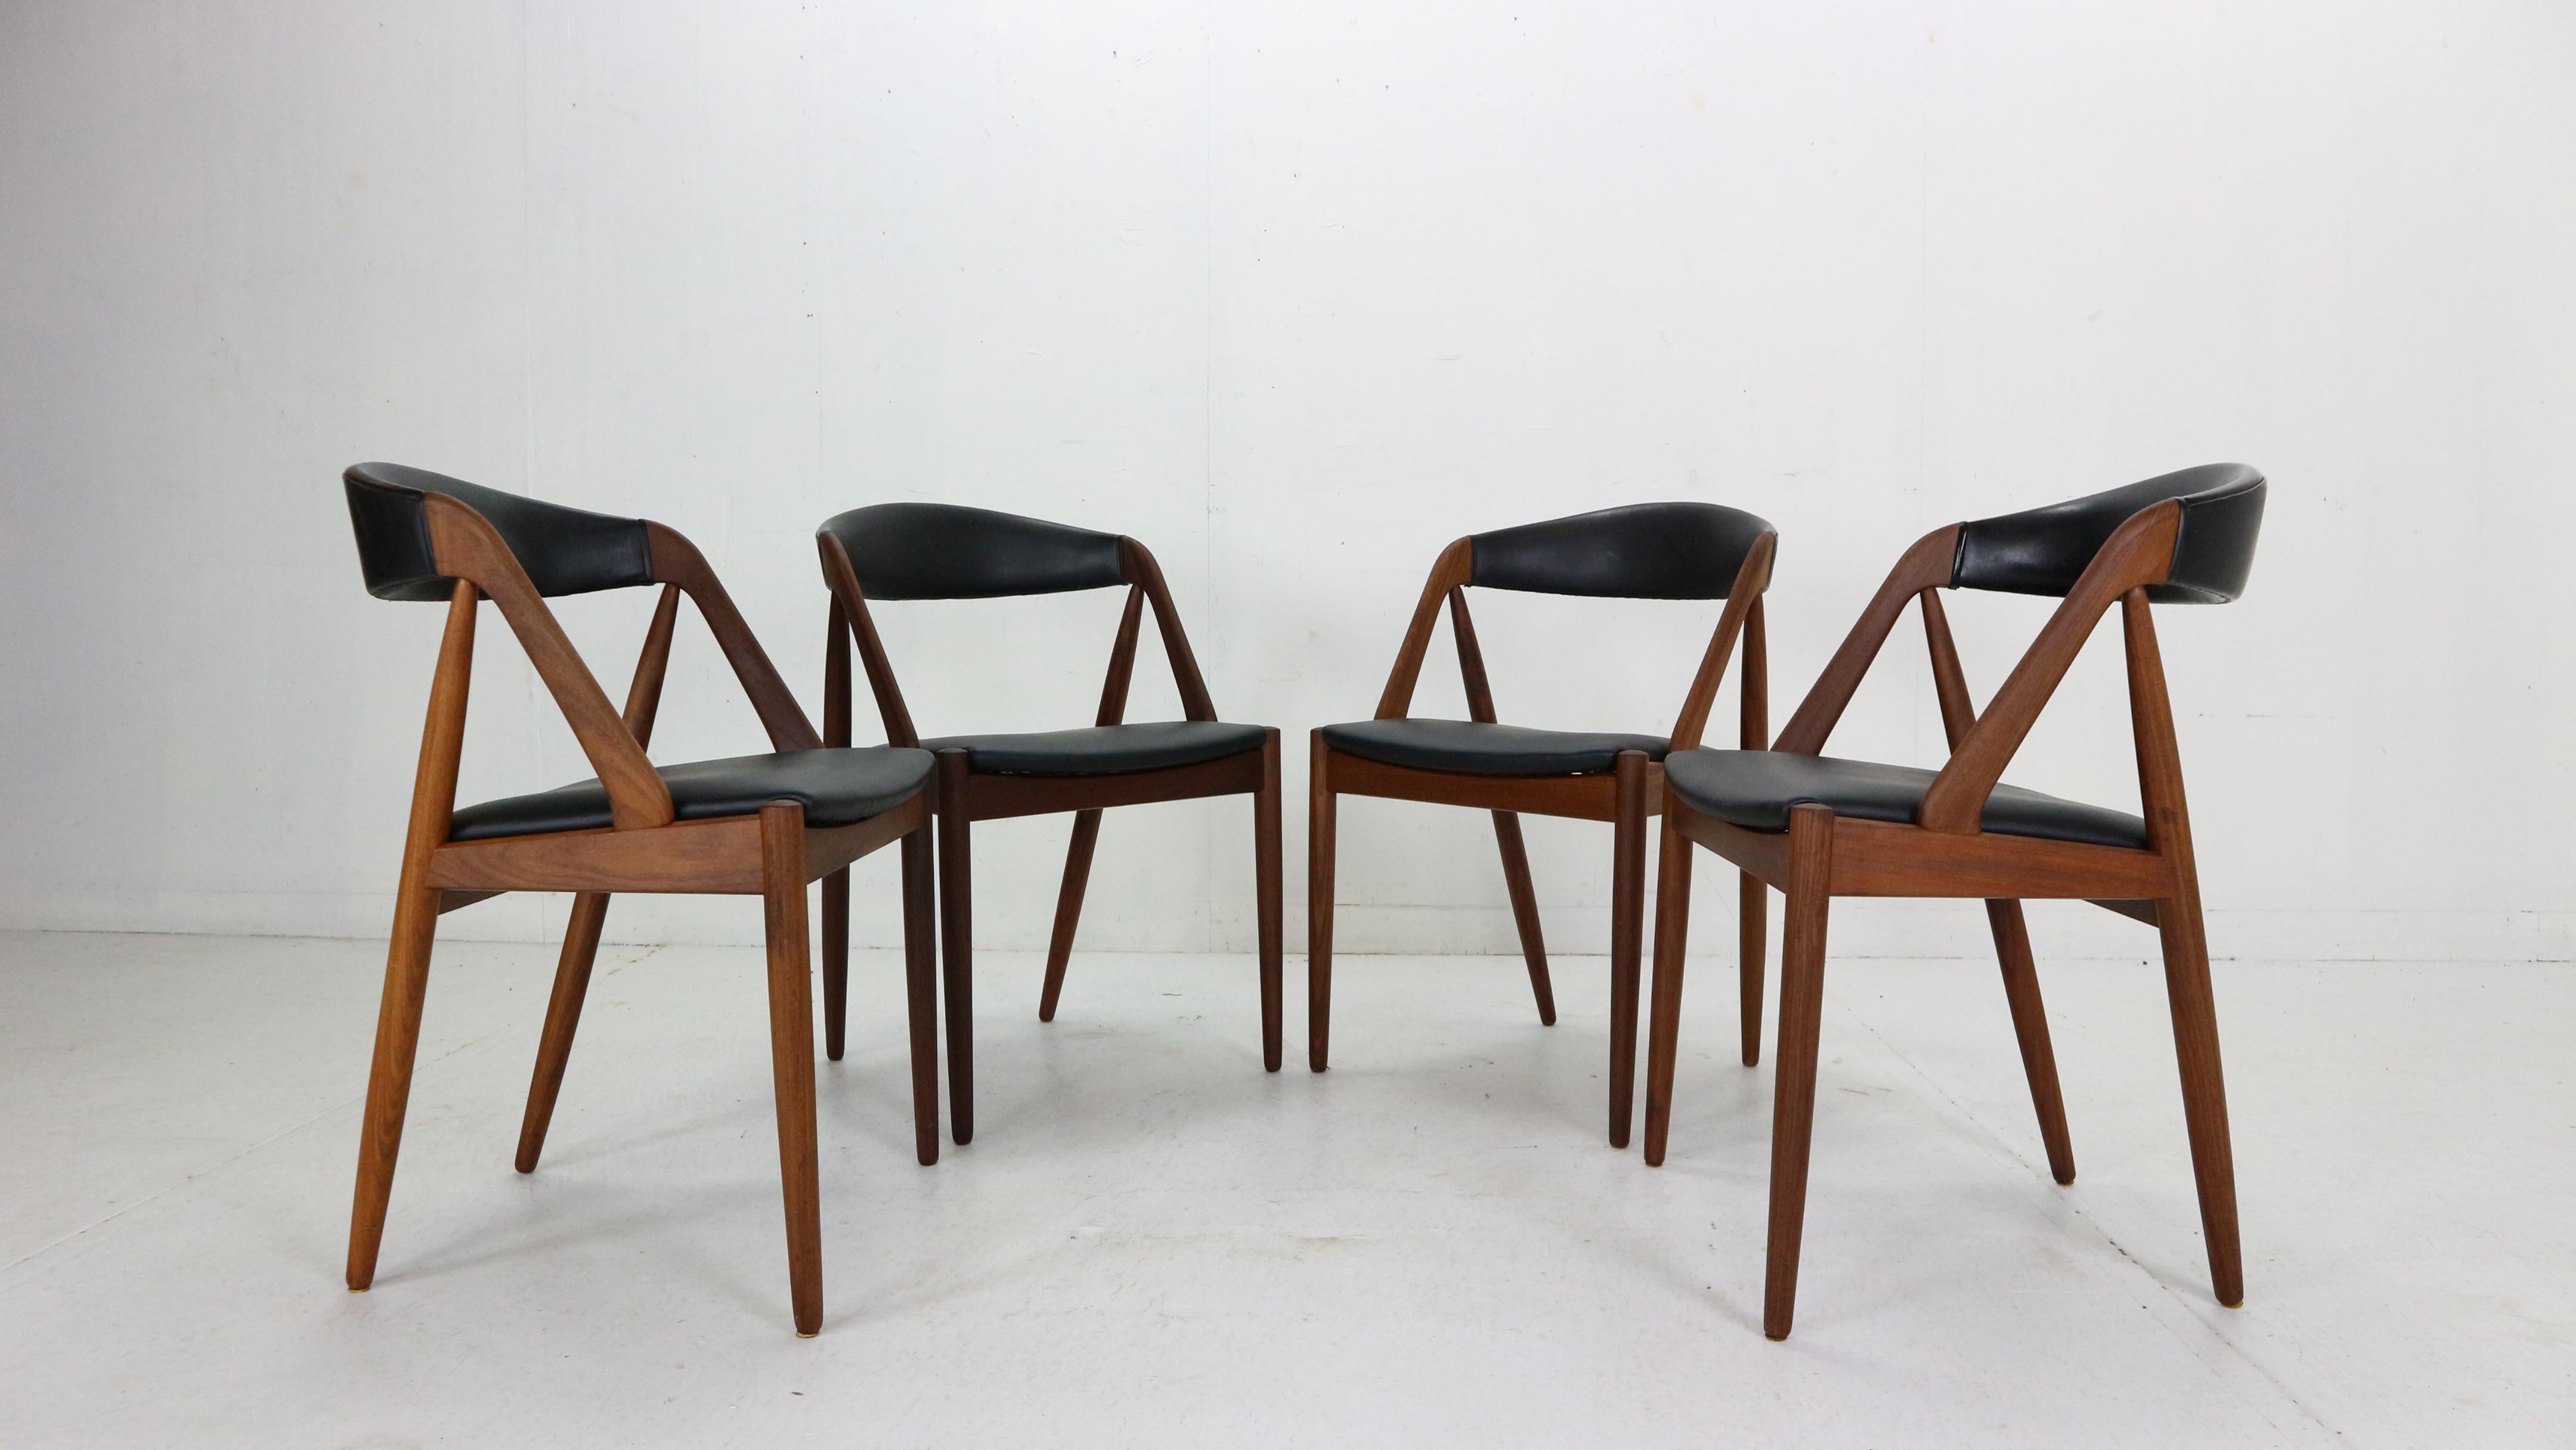 Scandinavian Modern period- Set of 4 dinning room chairs designed by Kai Kristiansen and manufactured for Schou Andersen Møbelfabrik in 1960s period, Denmark.
Model: 31.
Chairs consists teak wooden frame curved in 'A' form and black faux leather